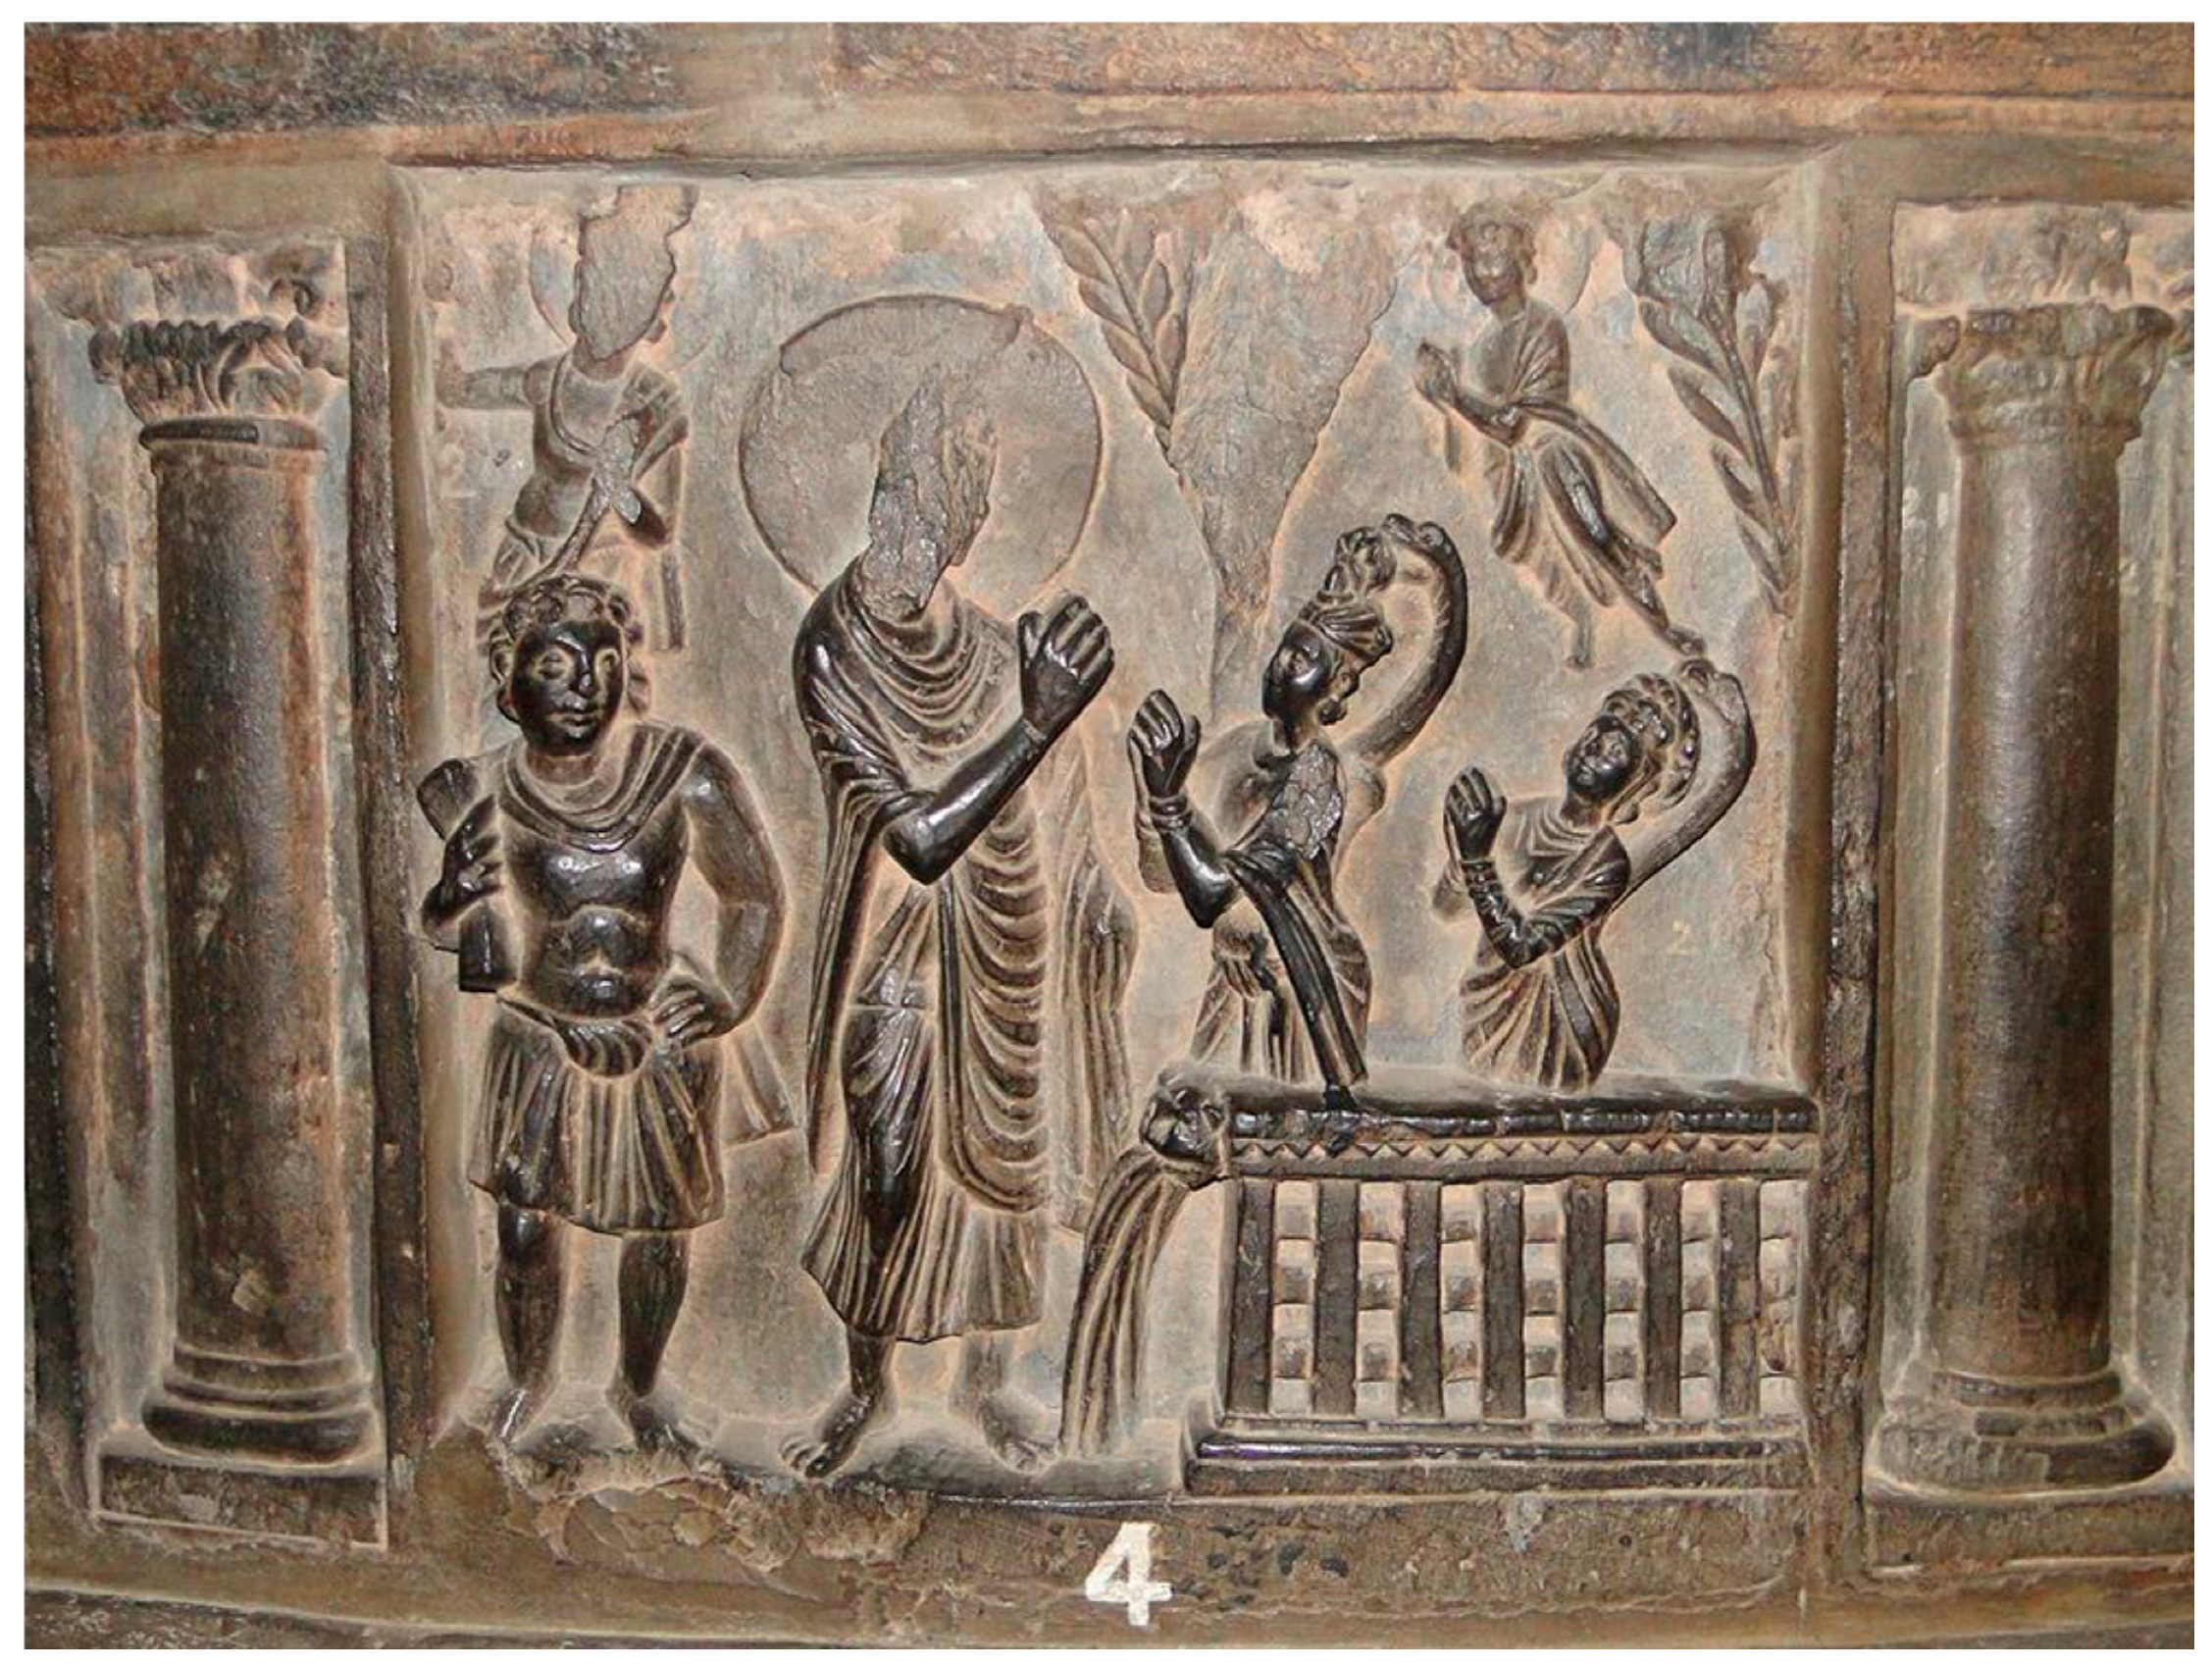 Religions Free Full-Text Traces of Reciprocal Exchange From Roman Pictorial Models to the Worlds Earliest Depictions of Some Narrative Motifs in Andhra Reliefs